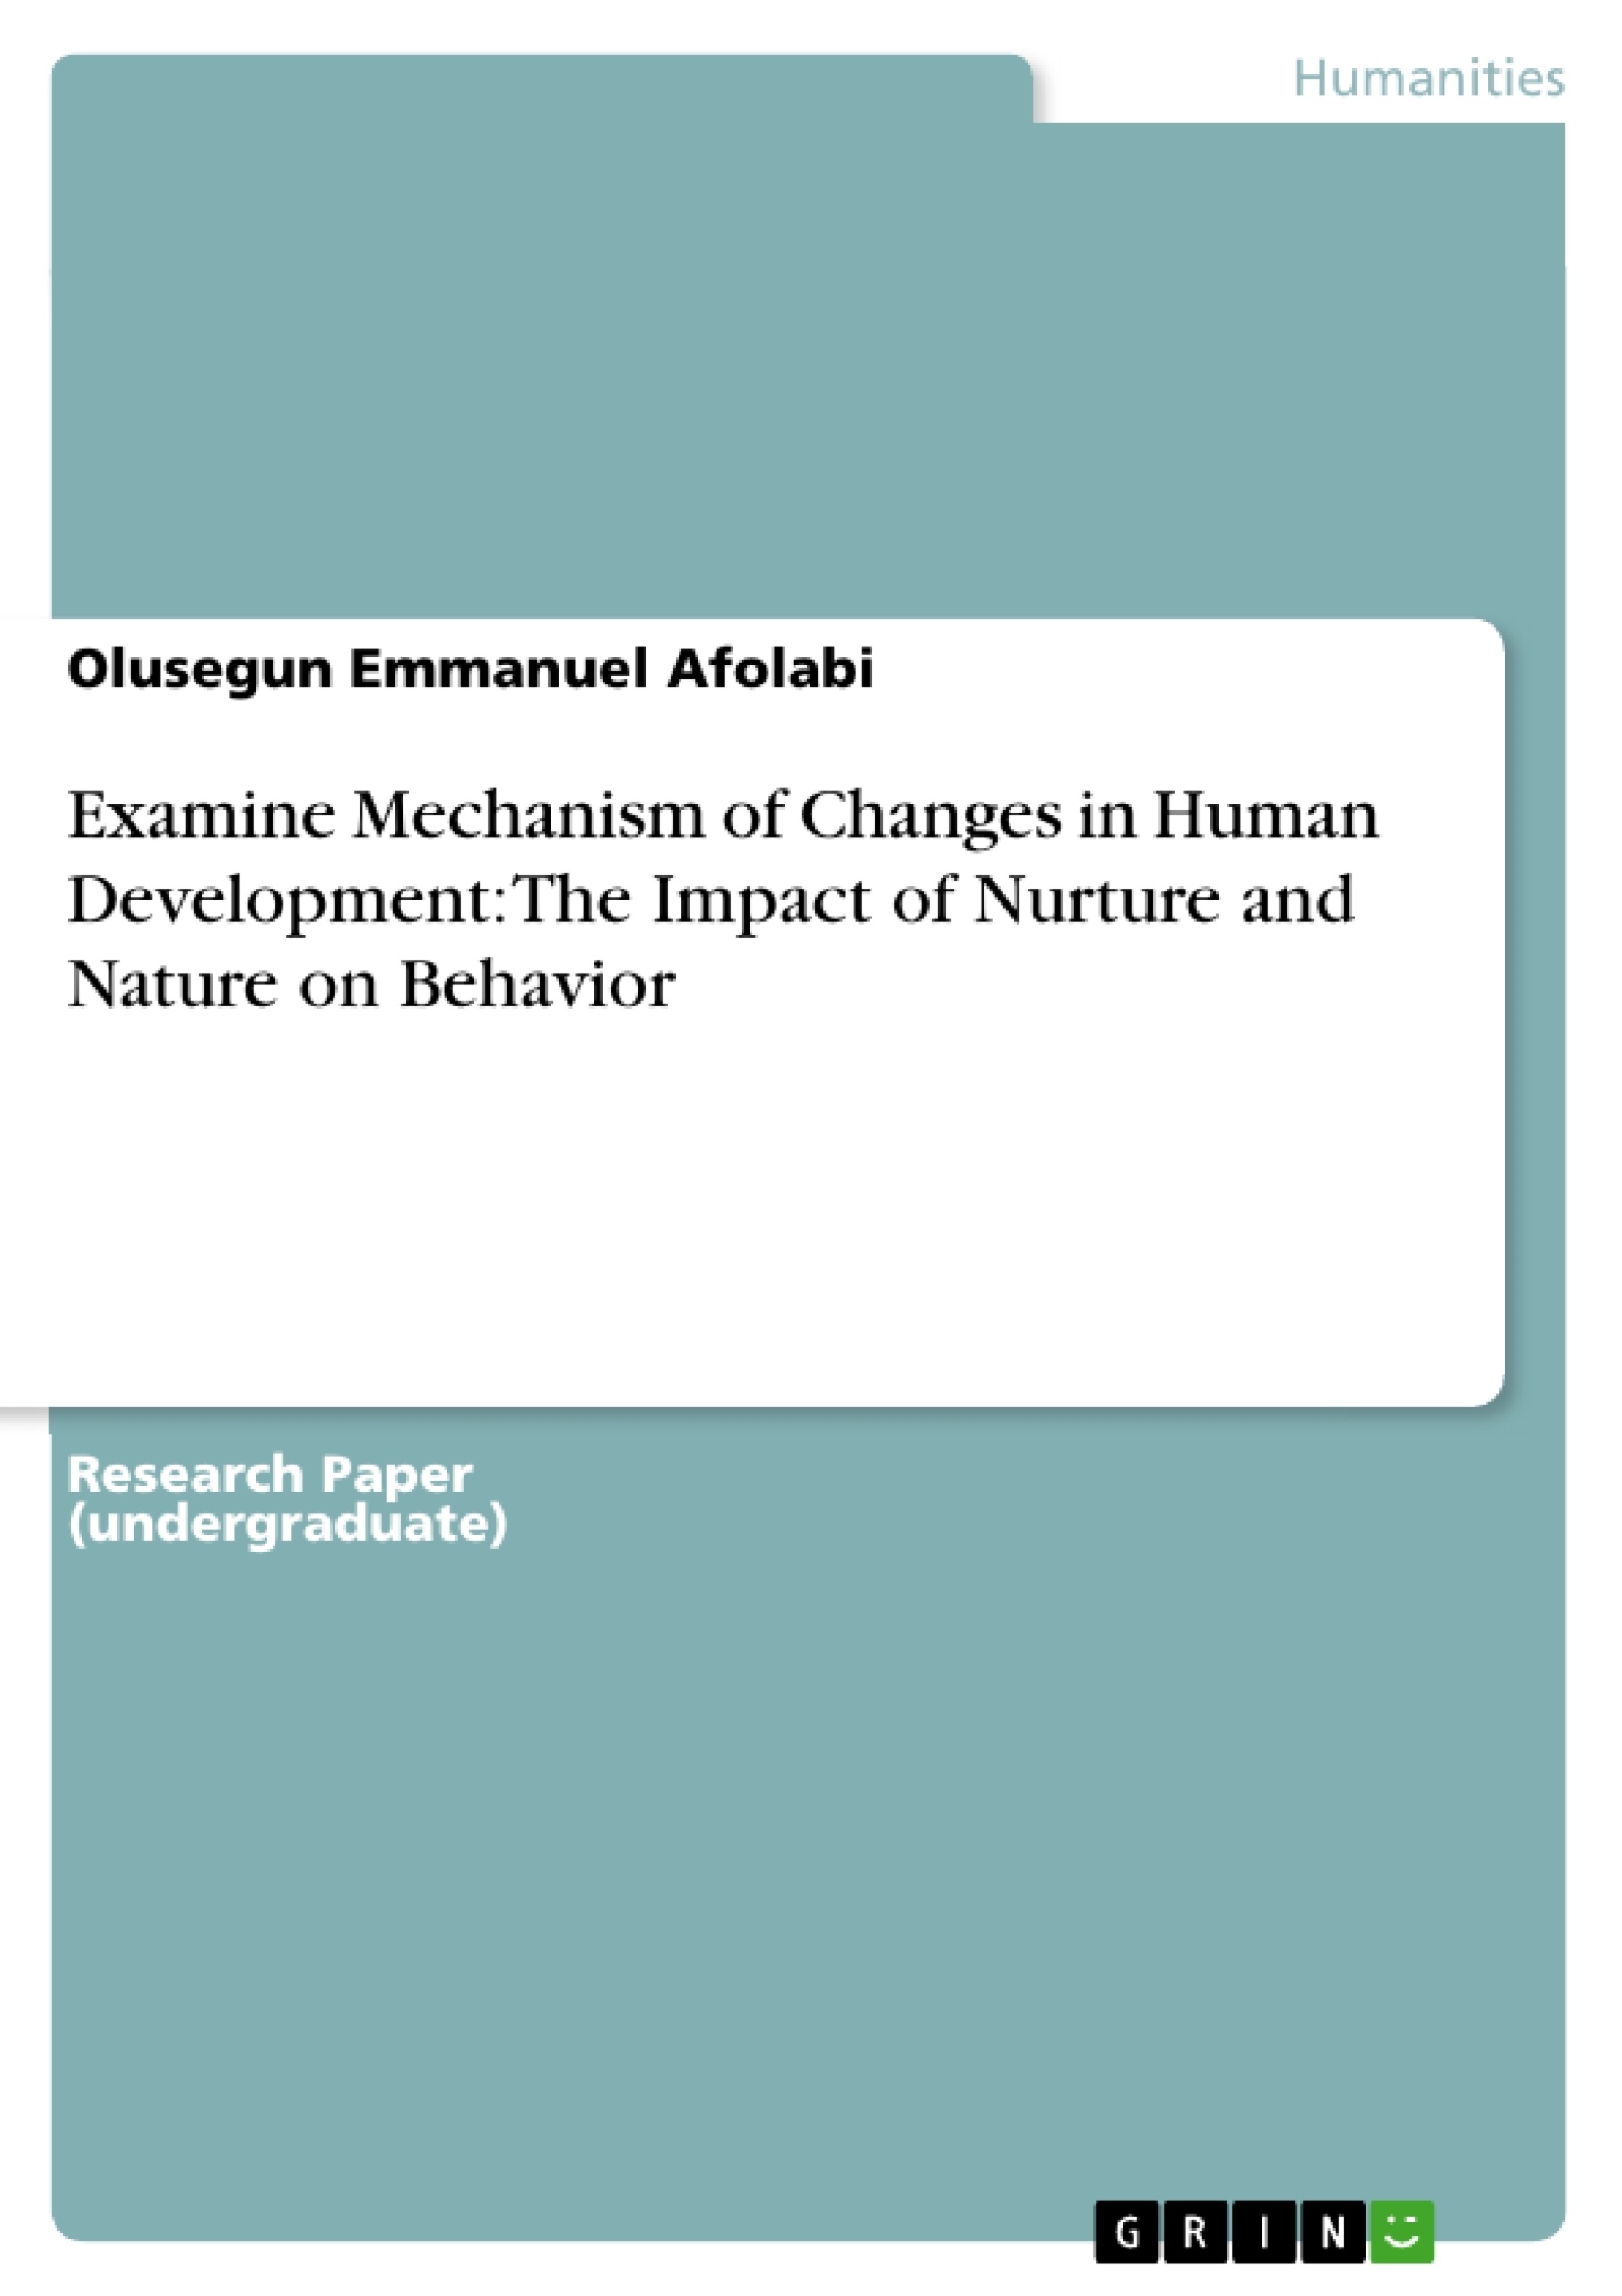 Título: Examine Mechanism of Changes in Human Development: The Impact of Nurture and Nature on Behavior               